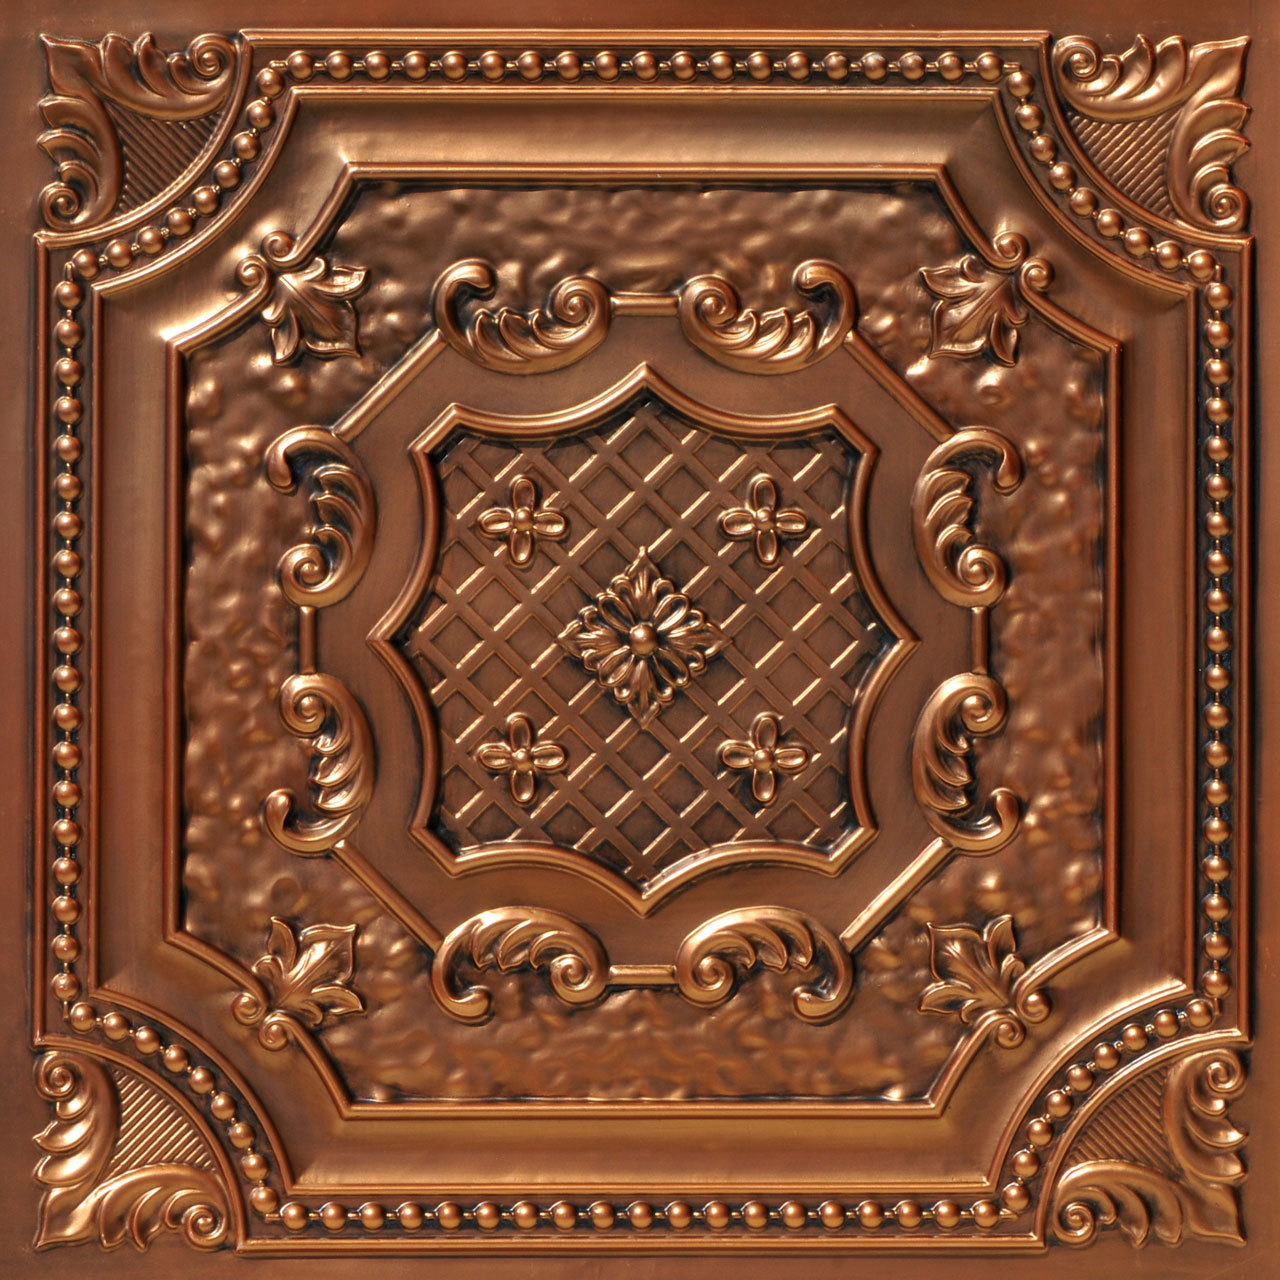 3d Antique Copper ceiling tile made from PVC was used as a floor tile in photography.